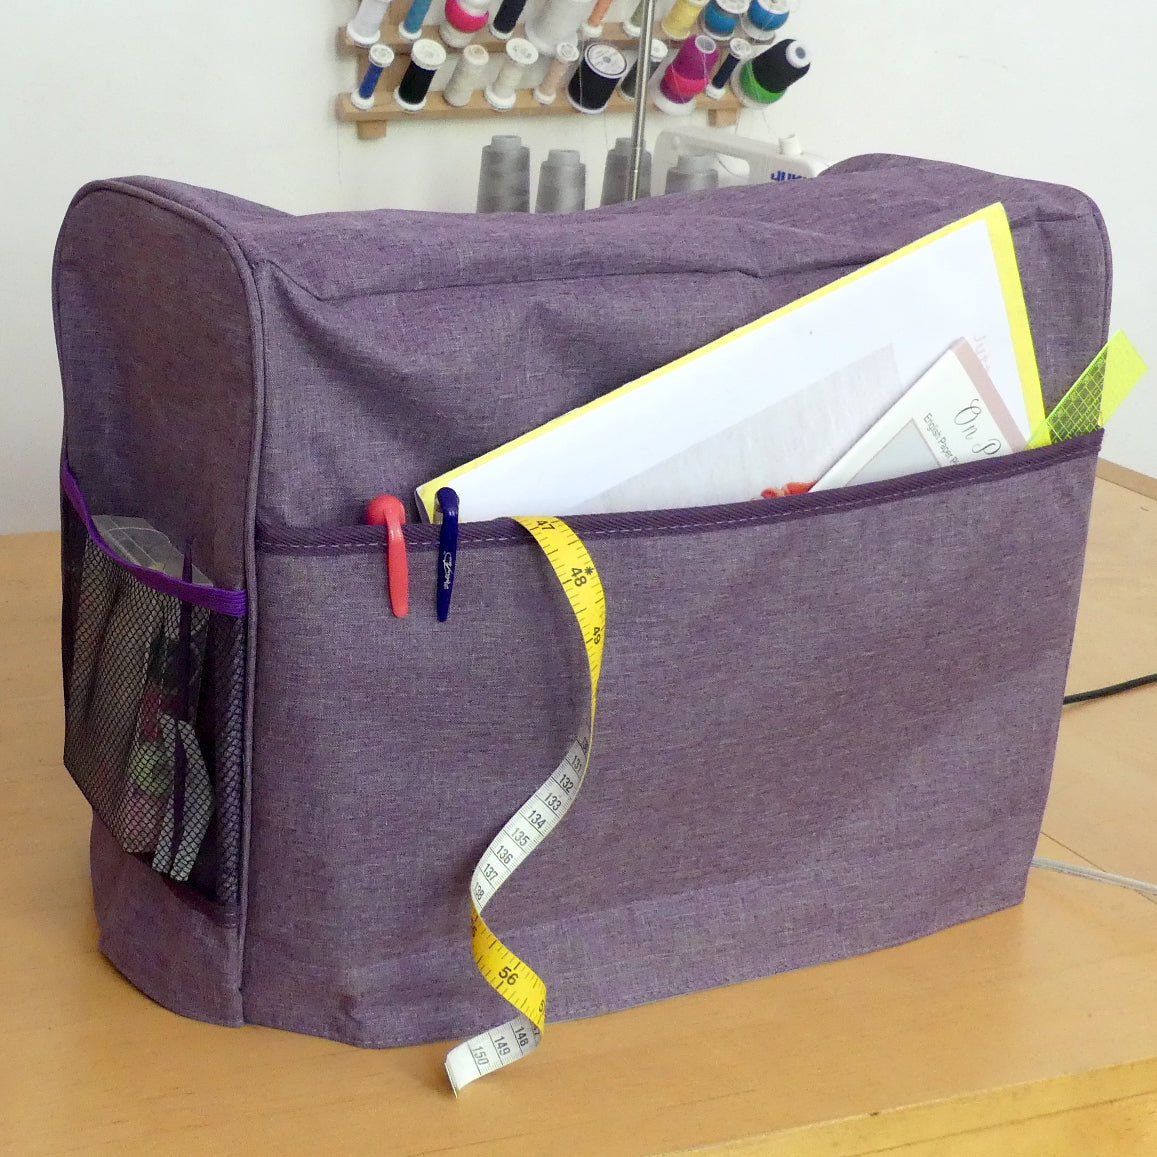 Purple Sewing Machine Cover with extra pockets to store tools or patterns